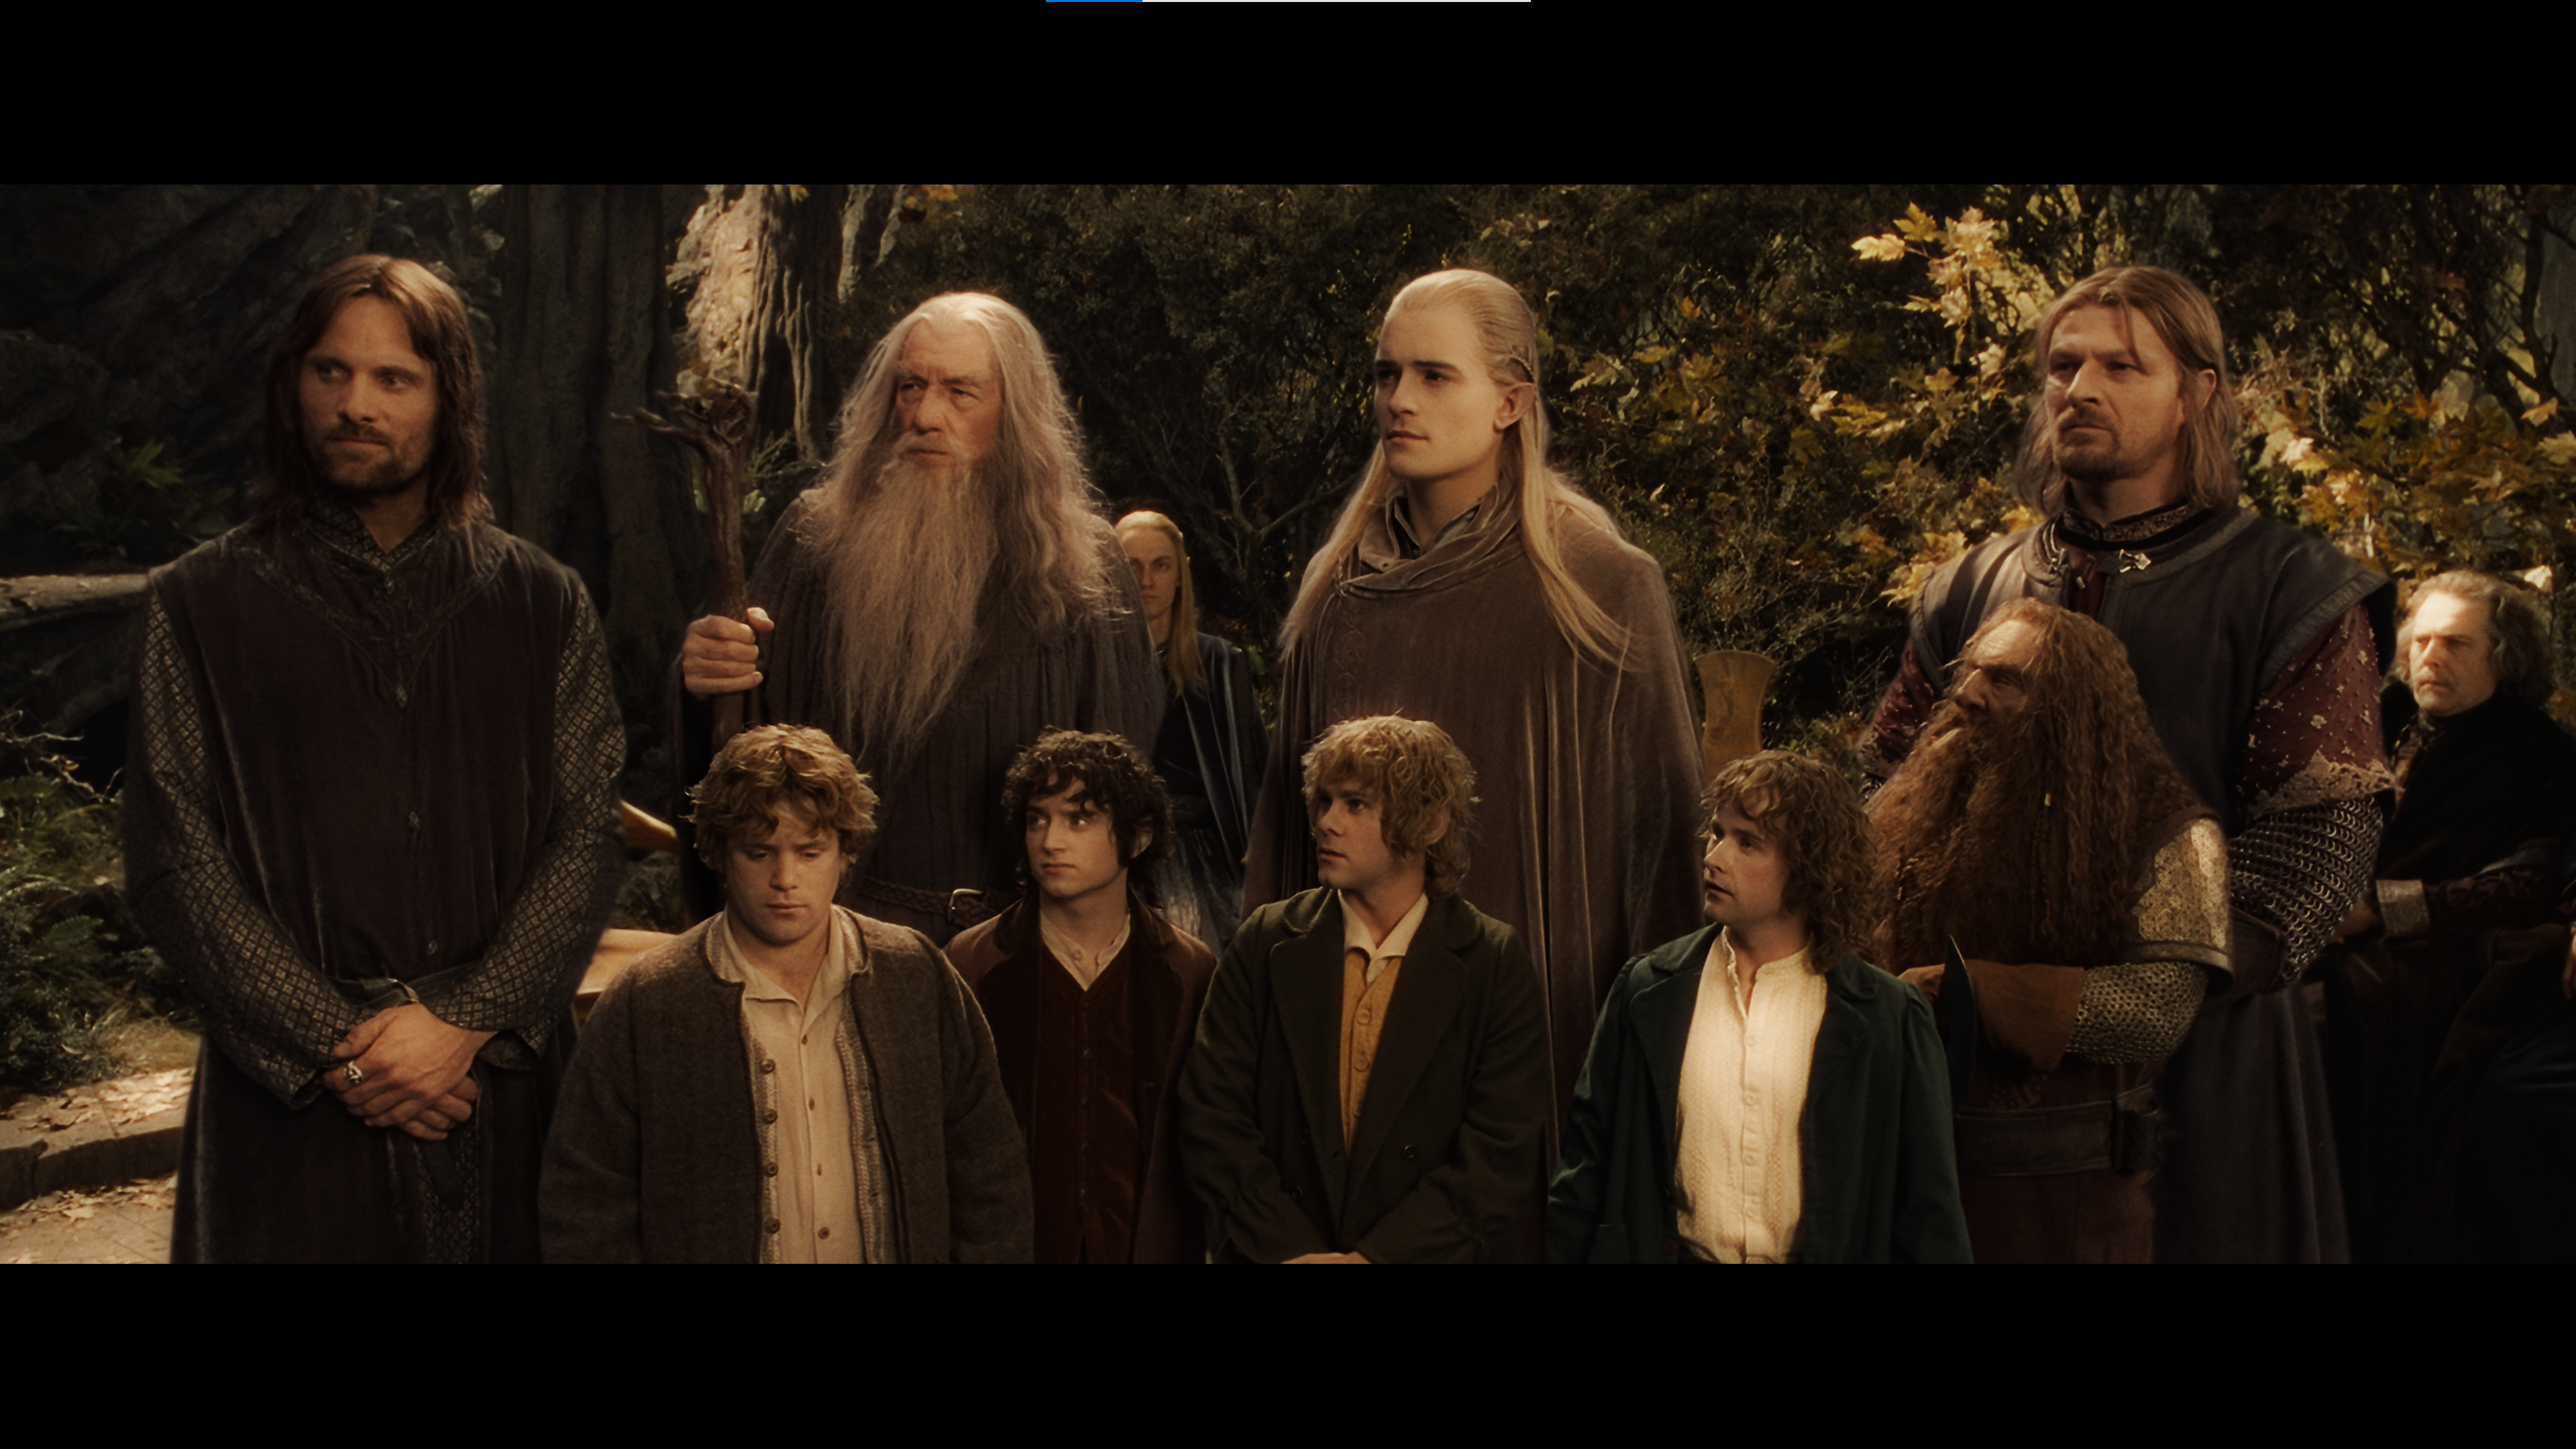 Implicaties Zuidoost spion The Lord of the Rings: The Fellowship of the Ring - 4K UHD Blu-ray Ultra HD  Review | High Def Digest